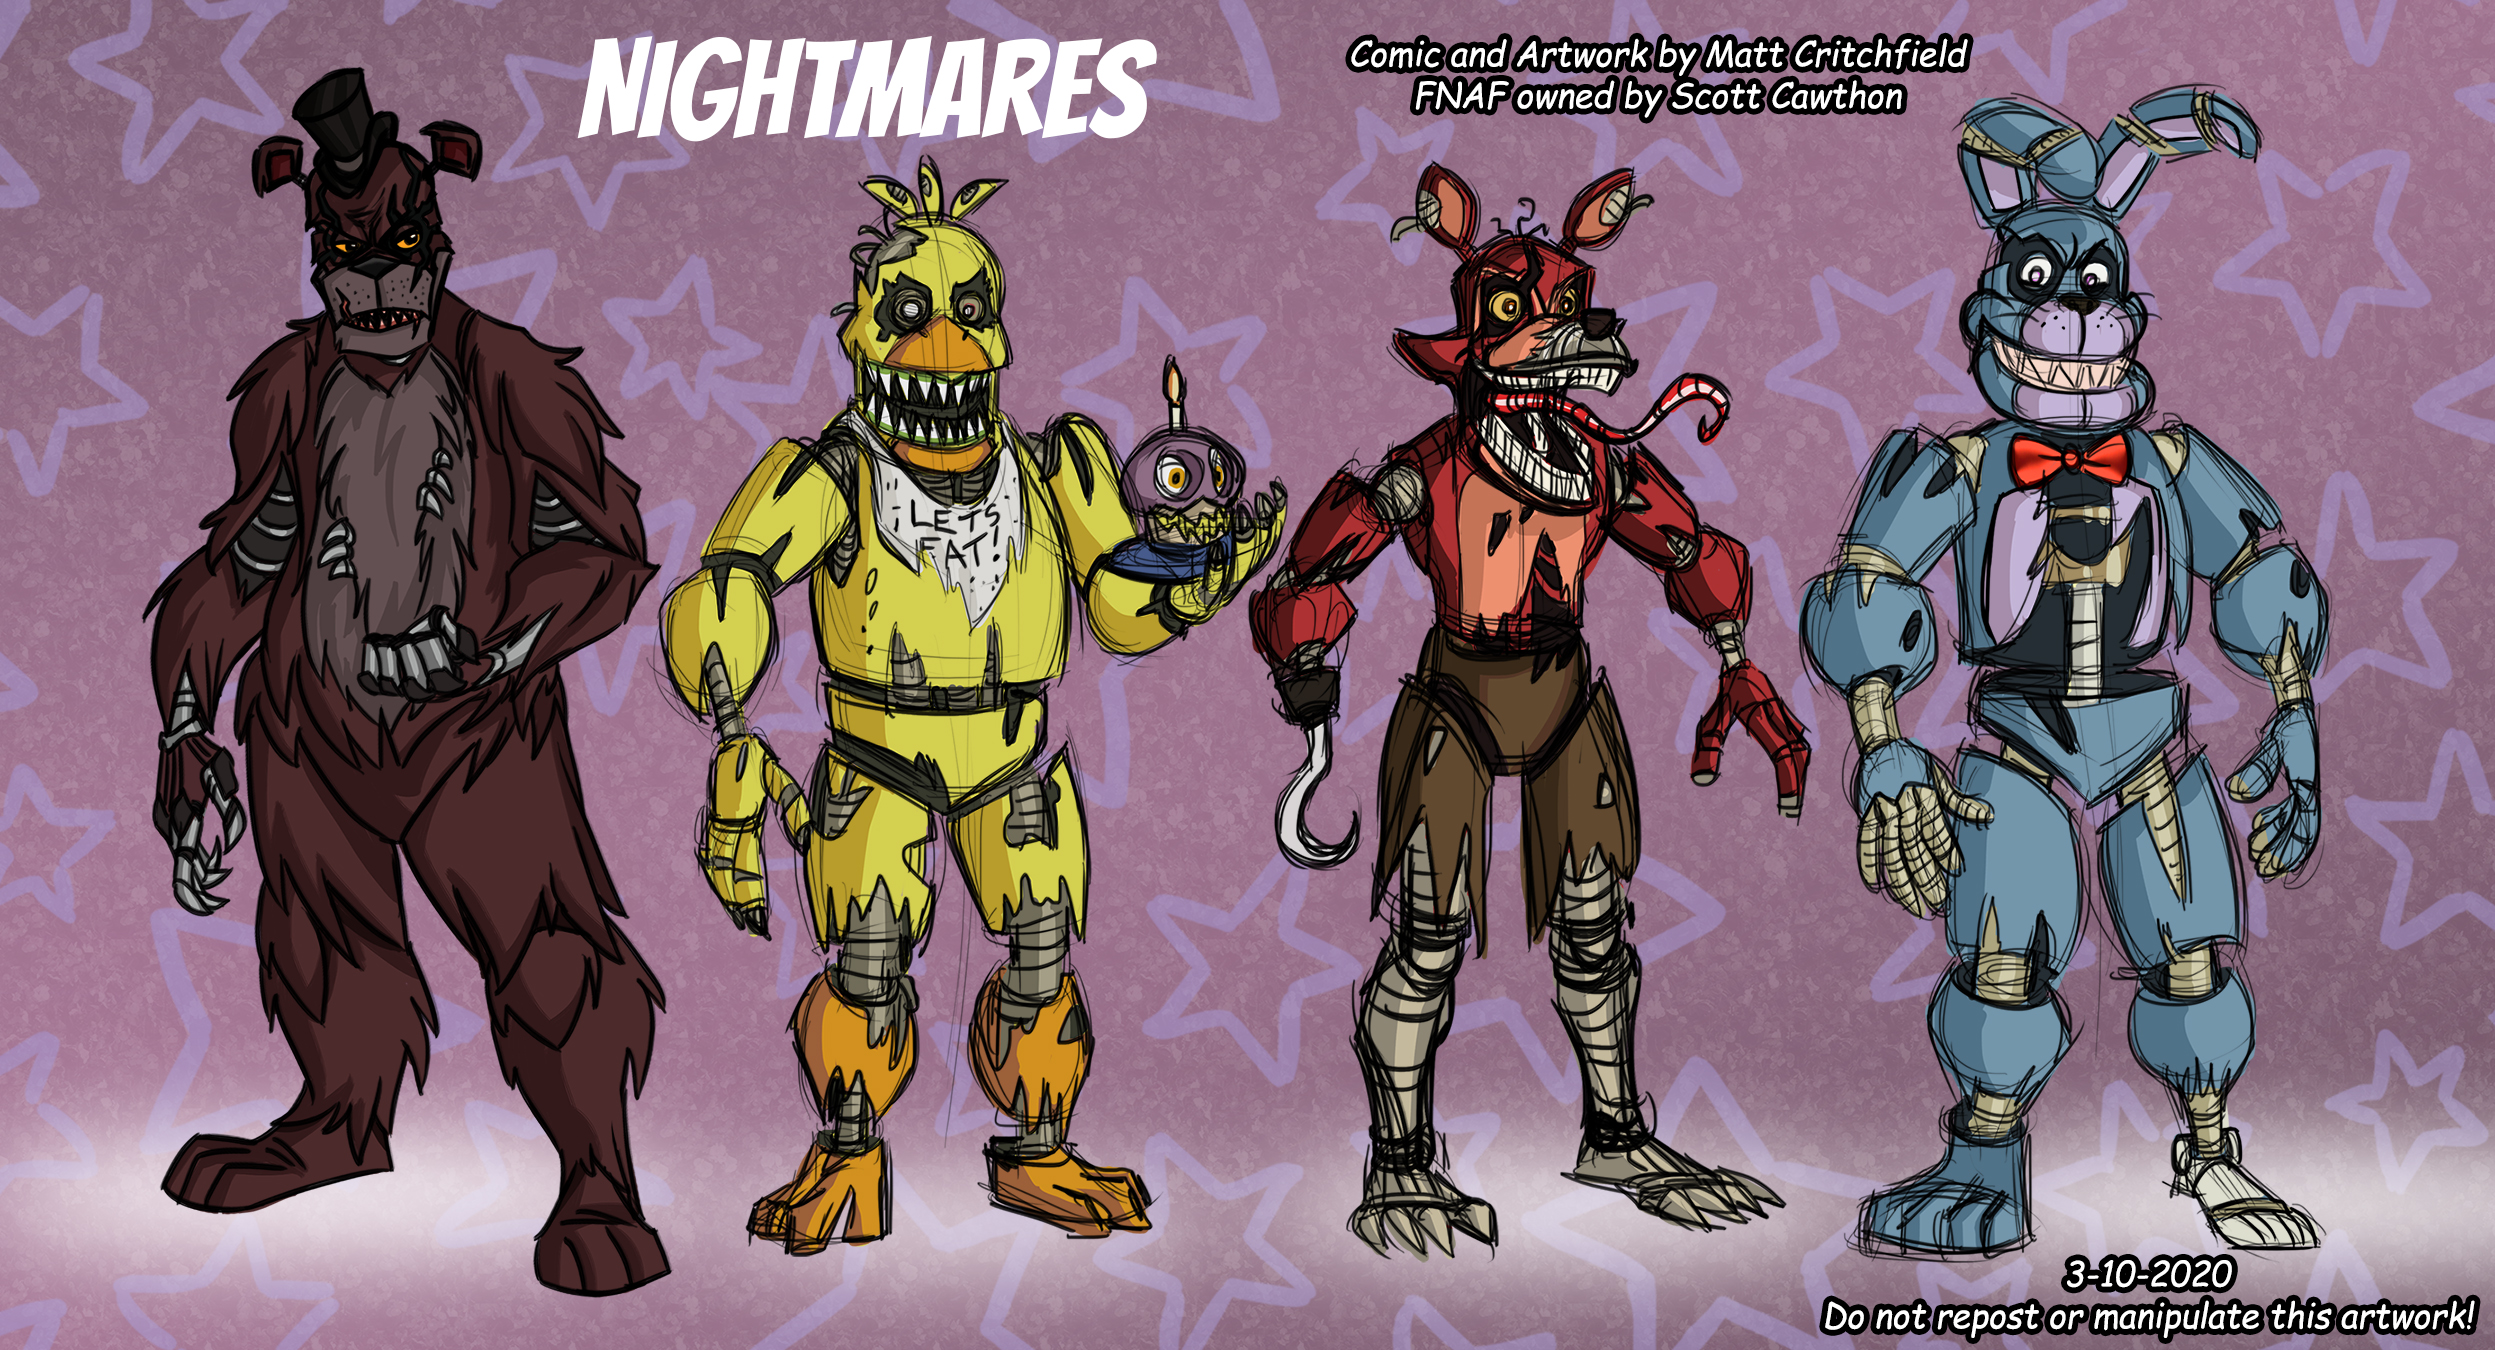 Nightmare Fnaf 4 Seven Years Anniversary/ inspired by a fanart